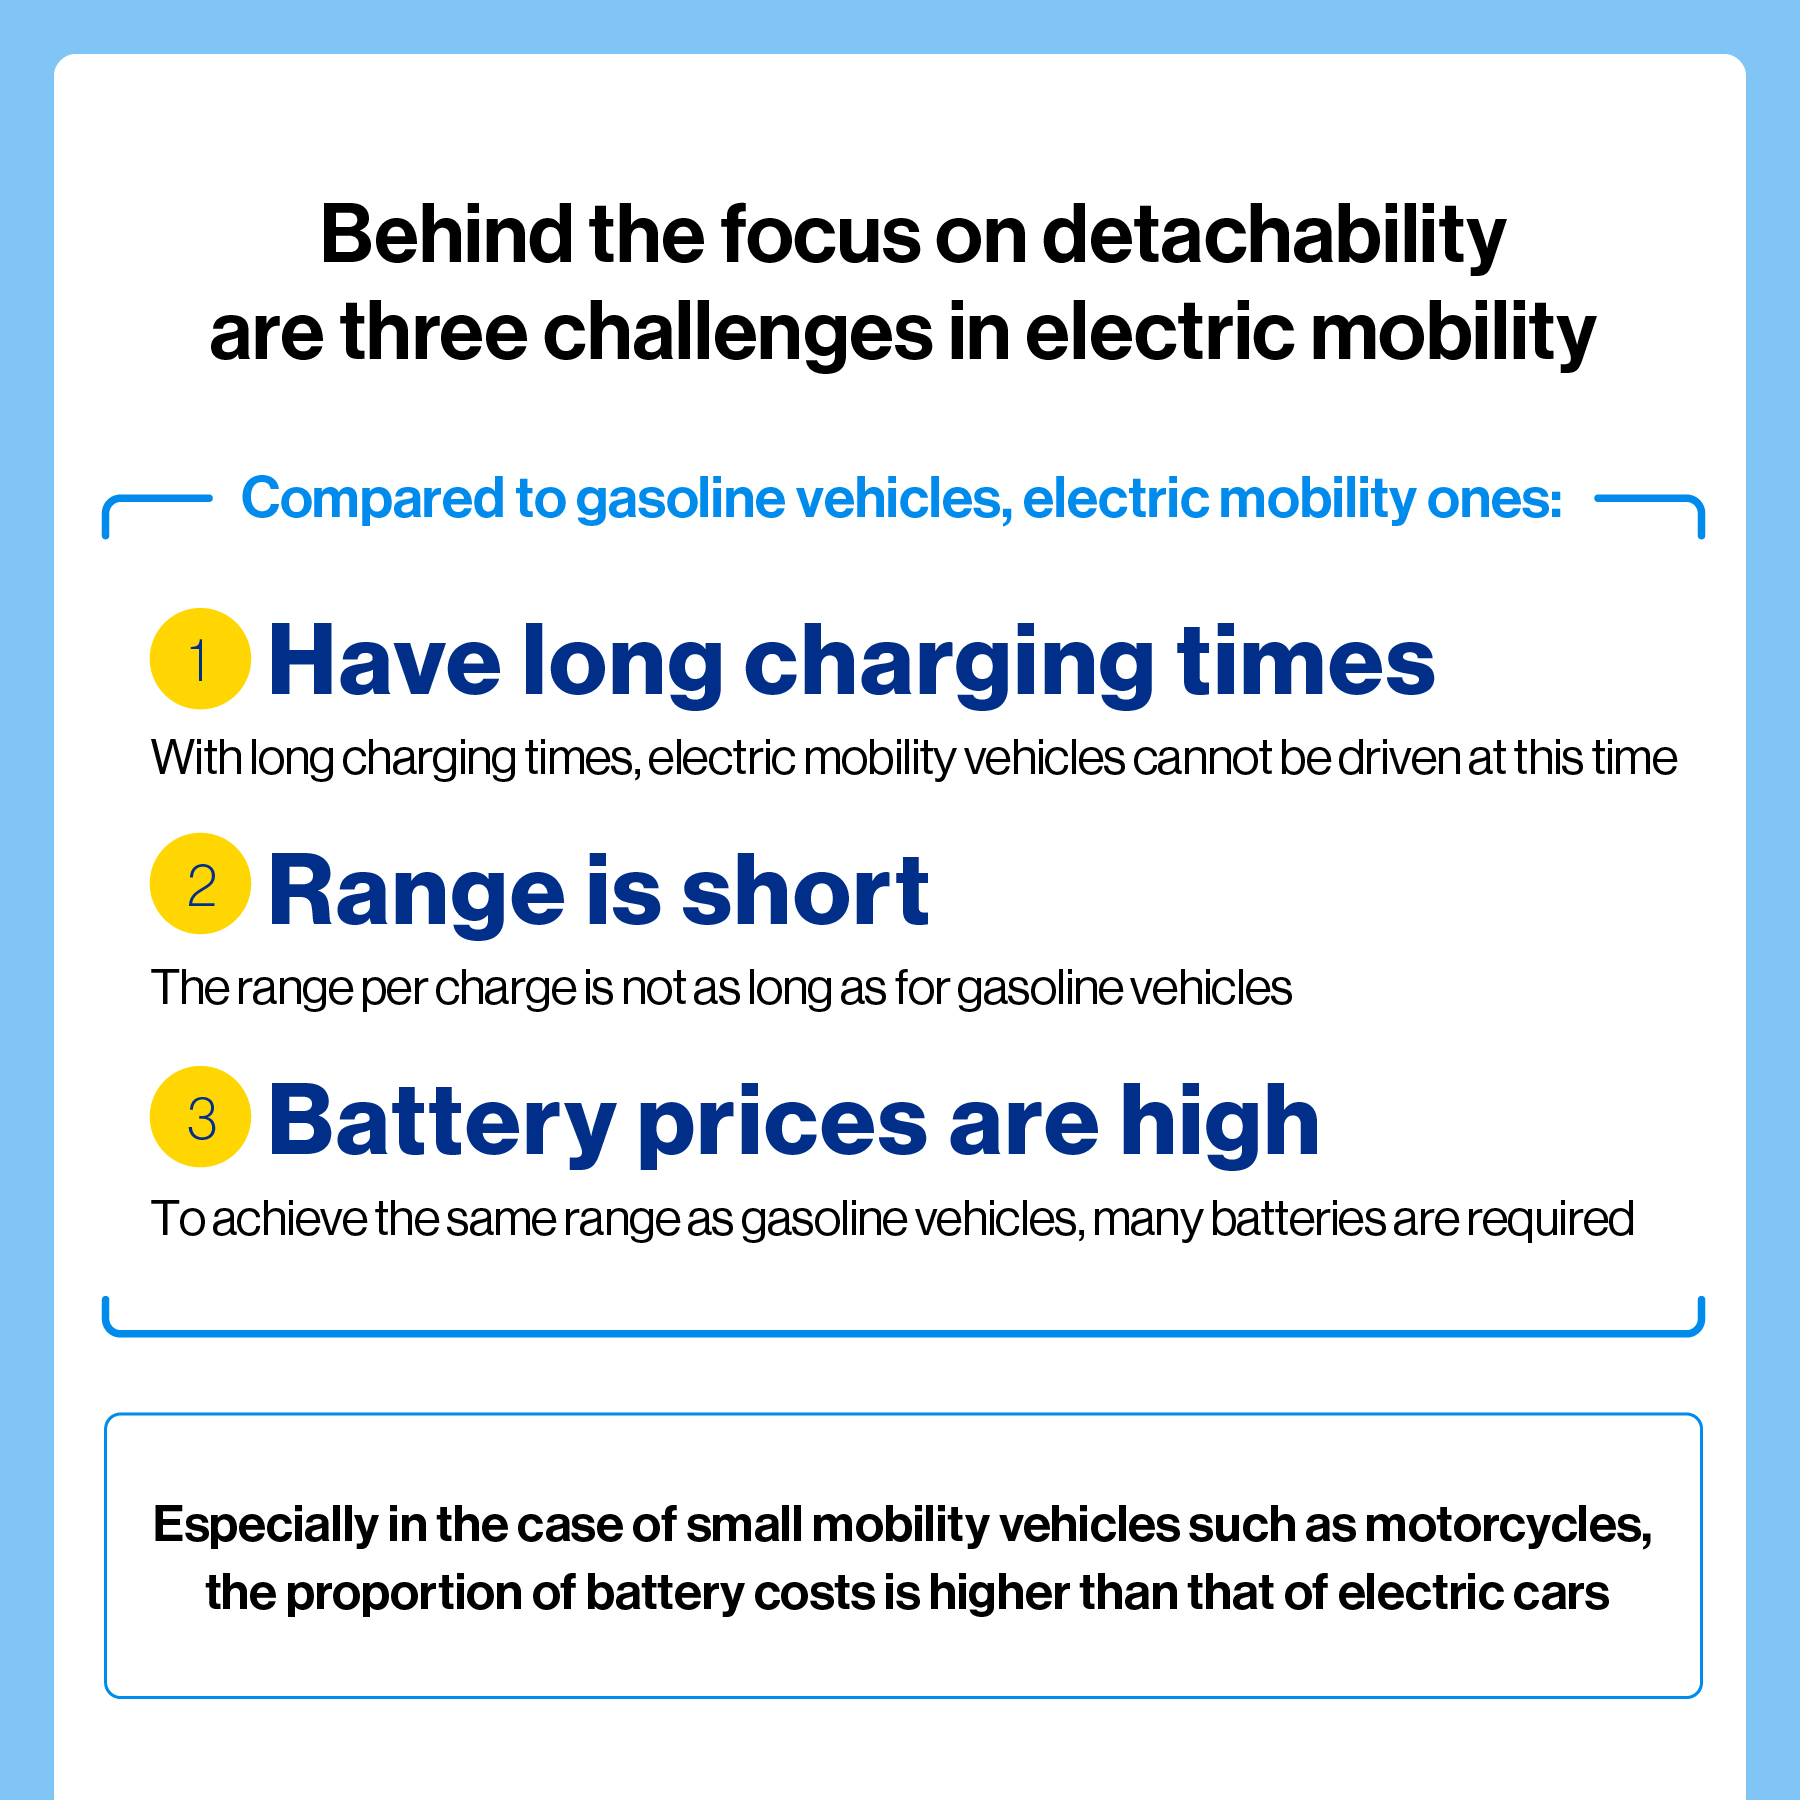 The three challenges of electric mobility (charging time, range, battery cost)